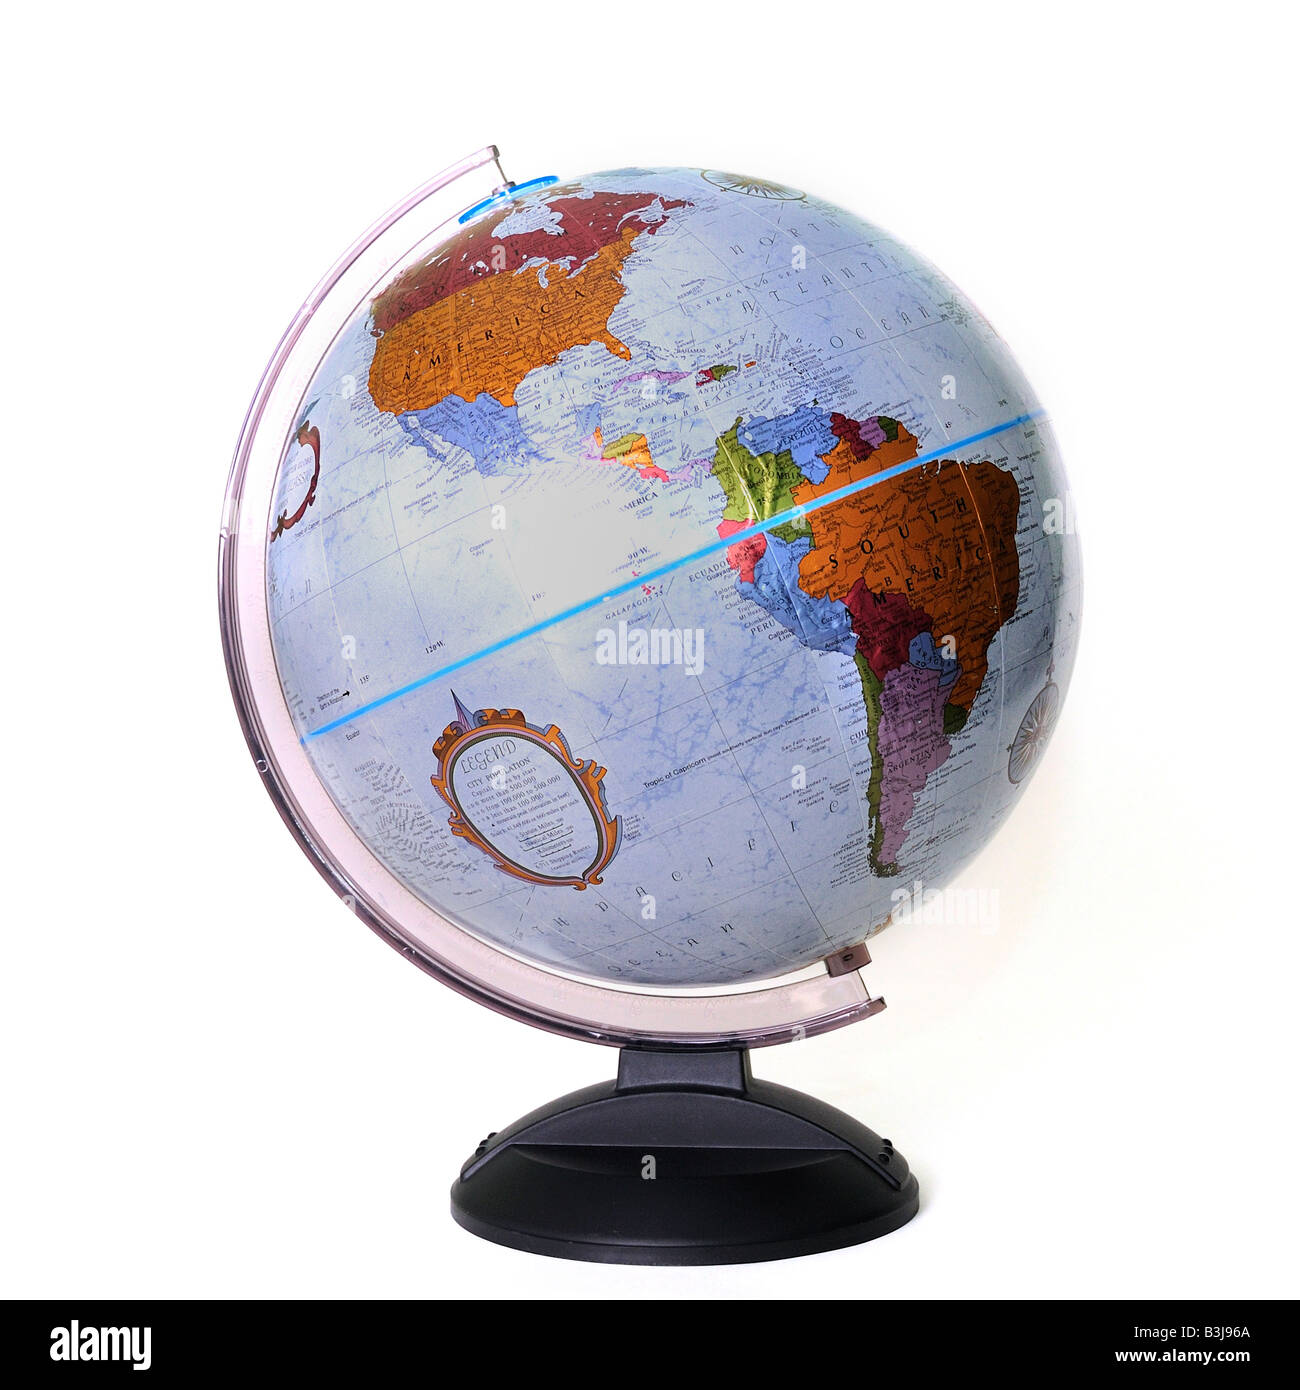 A world globe on a stand showing continents. Stock Photo